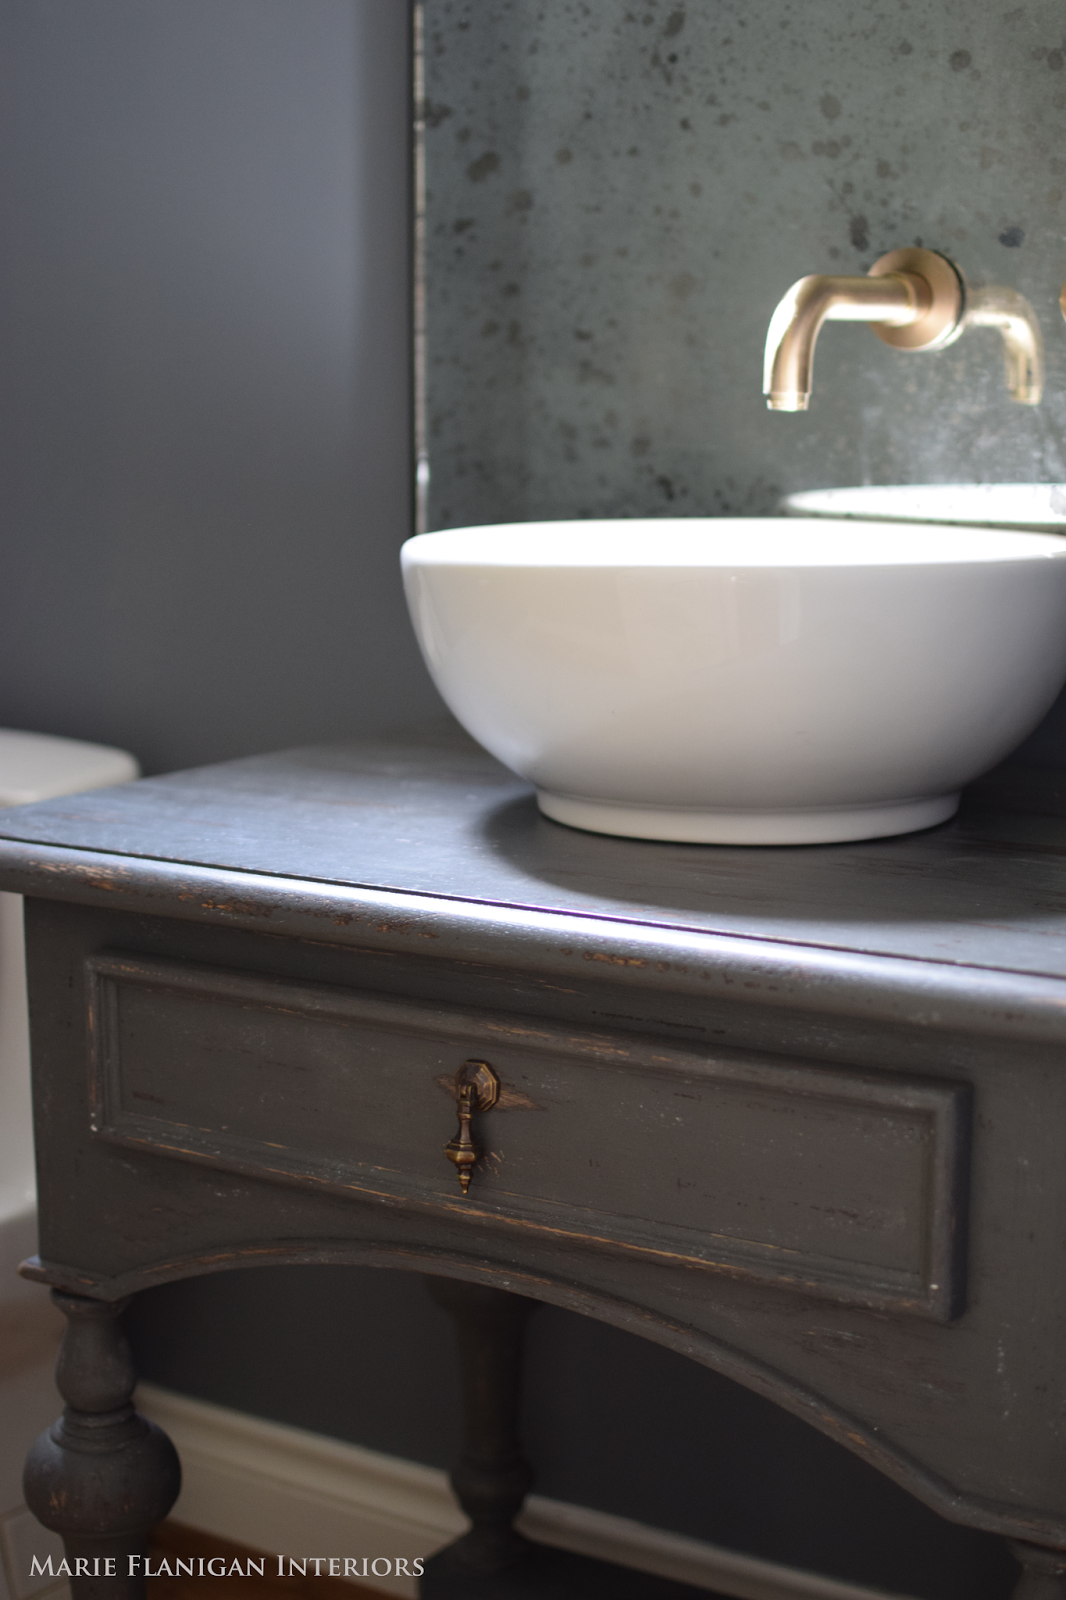 traditional bathroom basins new basin to come, but this wooden vanity is gorgeous!